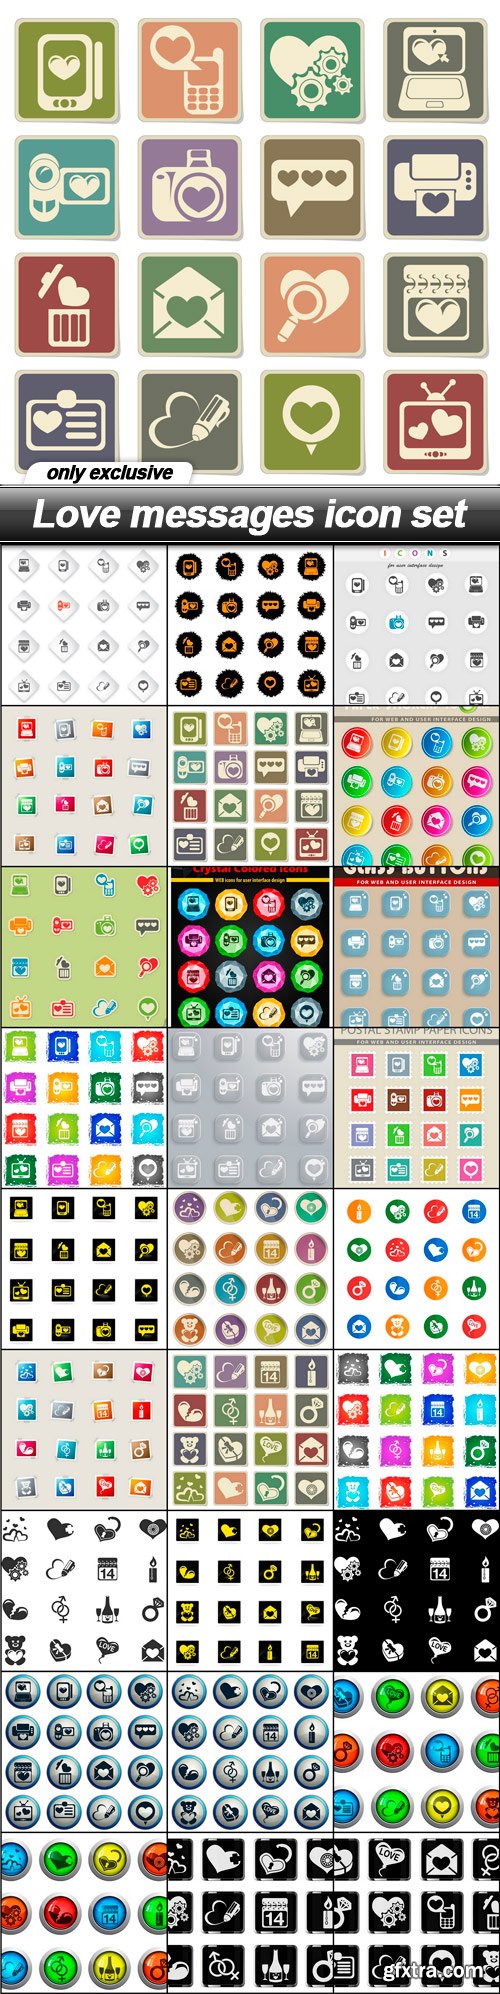 Love messages icon set - 27 EPS